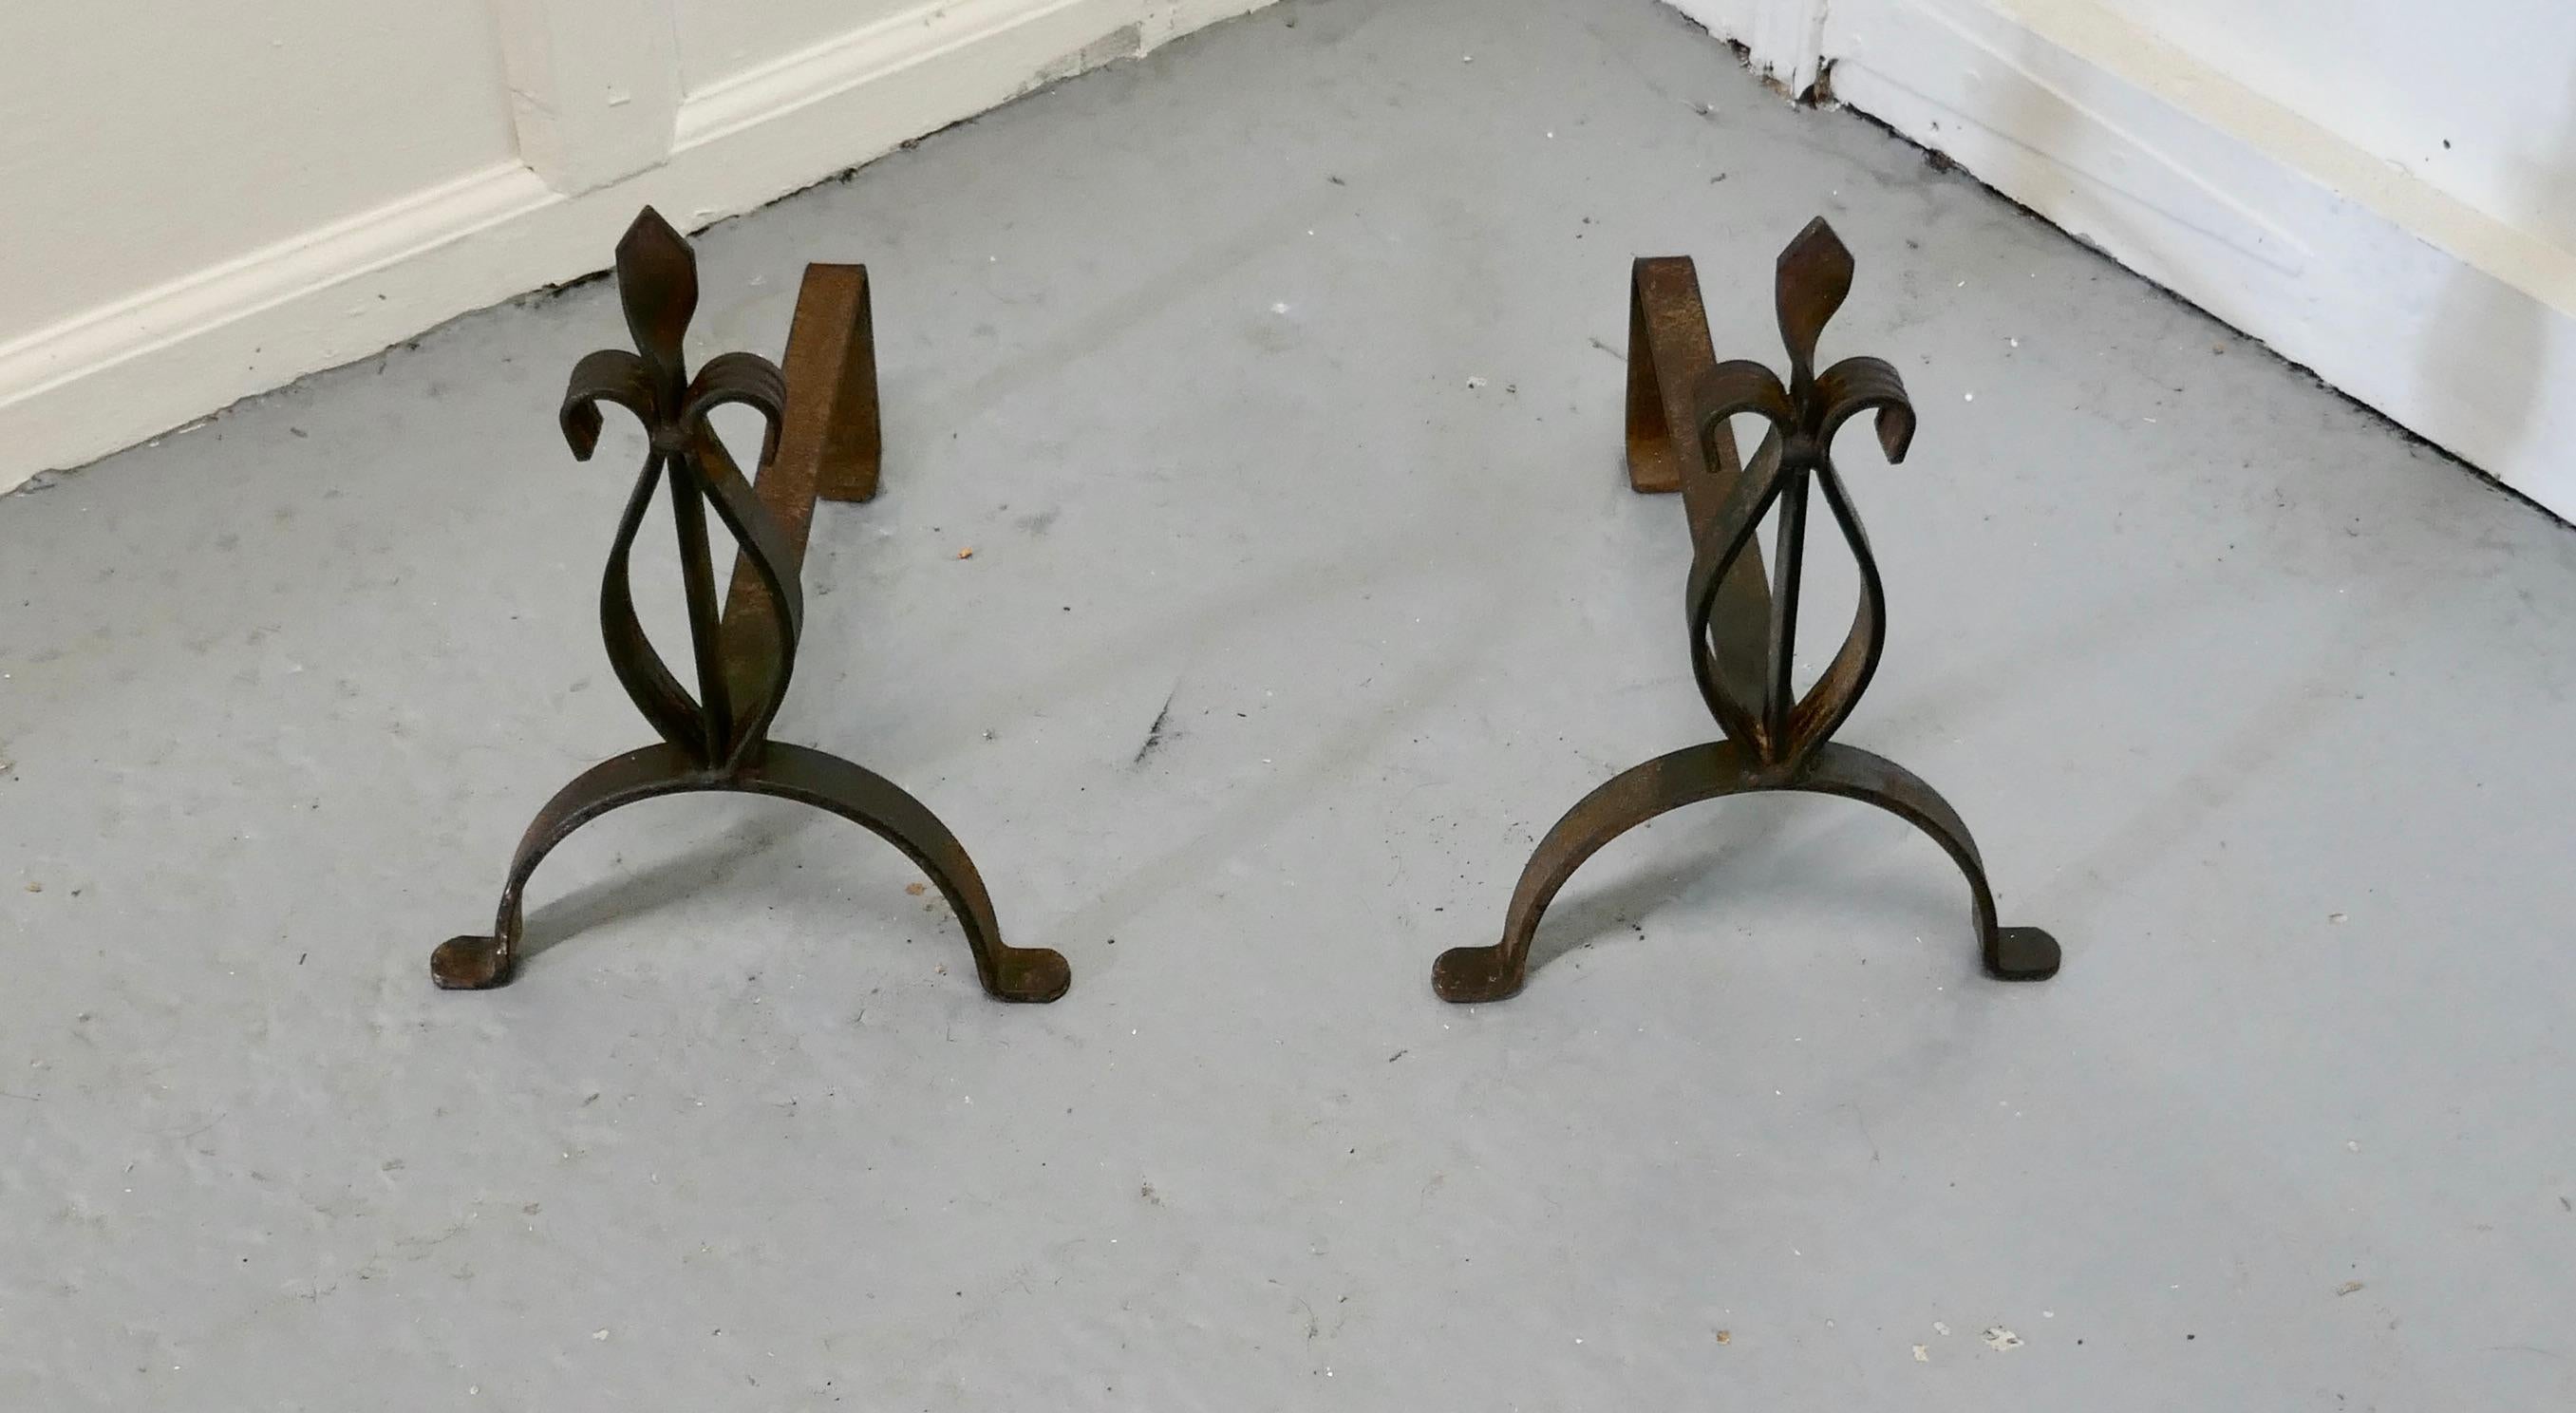 A pair of French 19th century iron andirons or fire dogs

This is a heavy pair of antique andirons, they are made in iron, and stand on wide front foot with a decorative Fleur de Lys at the top
The andirons are 13” high, 14” long and are 10” wide